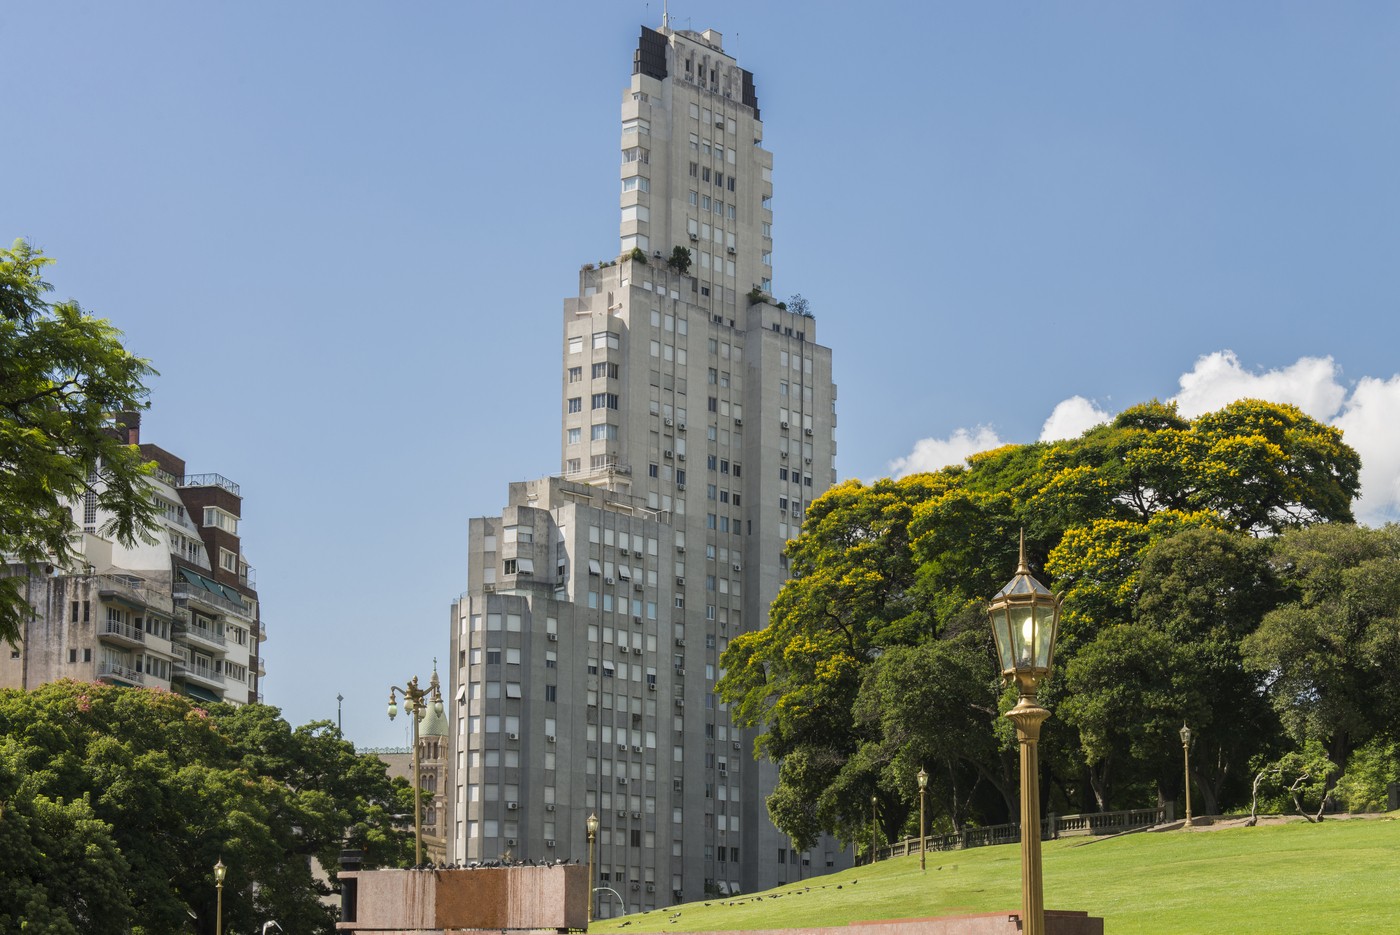 The Kavanagh Building (Spanish: Edificio Kavanagh) is an Art Deco skyscraper in Buenos Aires, Argentina located in the district (barrio) of Retiro, overlooking Plaza San Martín. It was designed in 1934 and its construction took only 14 months. (Foto: Getty Images/iStockphoto)